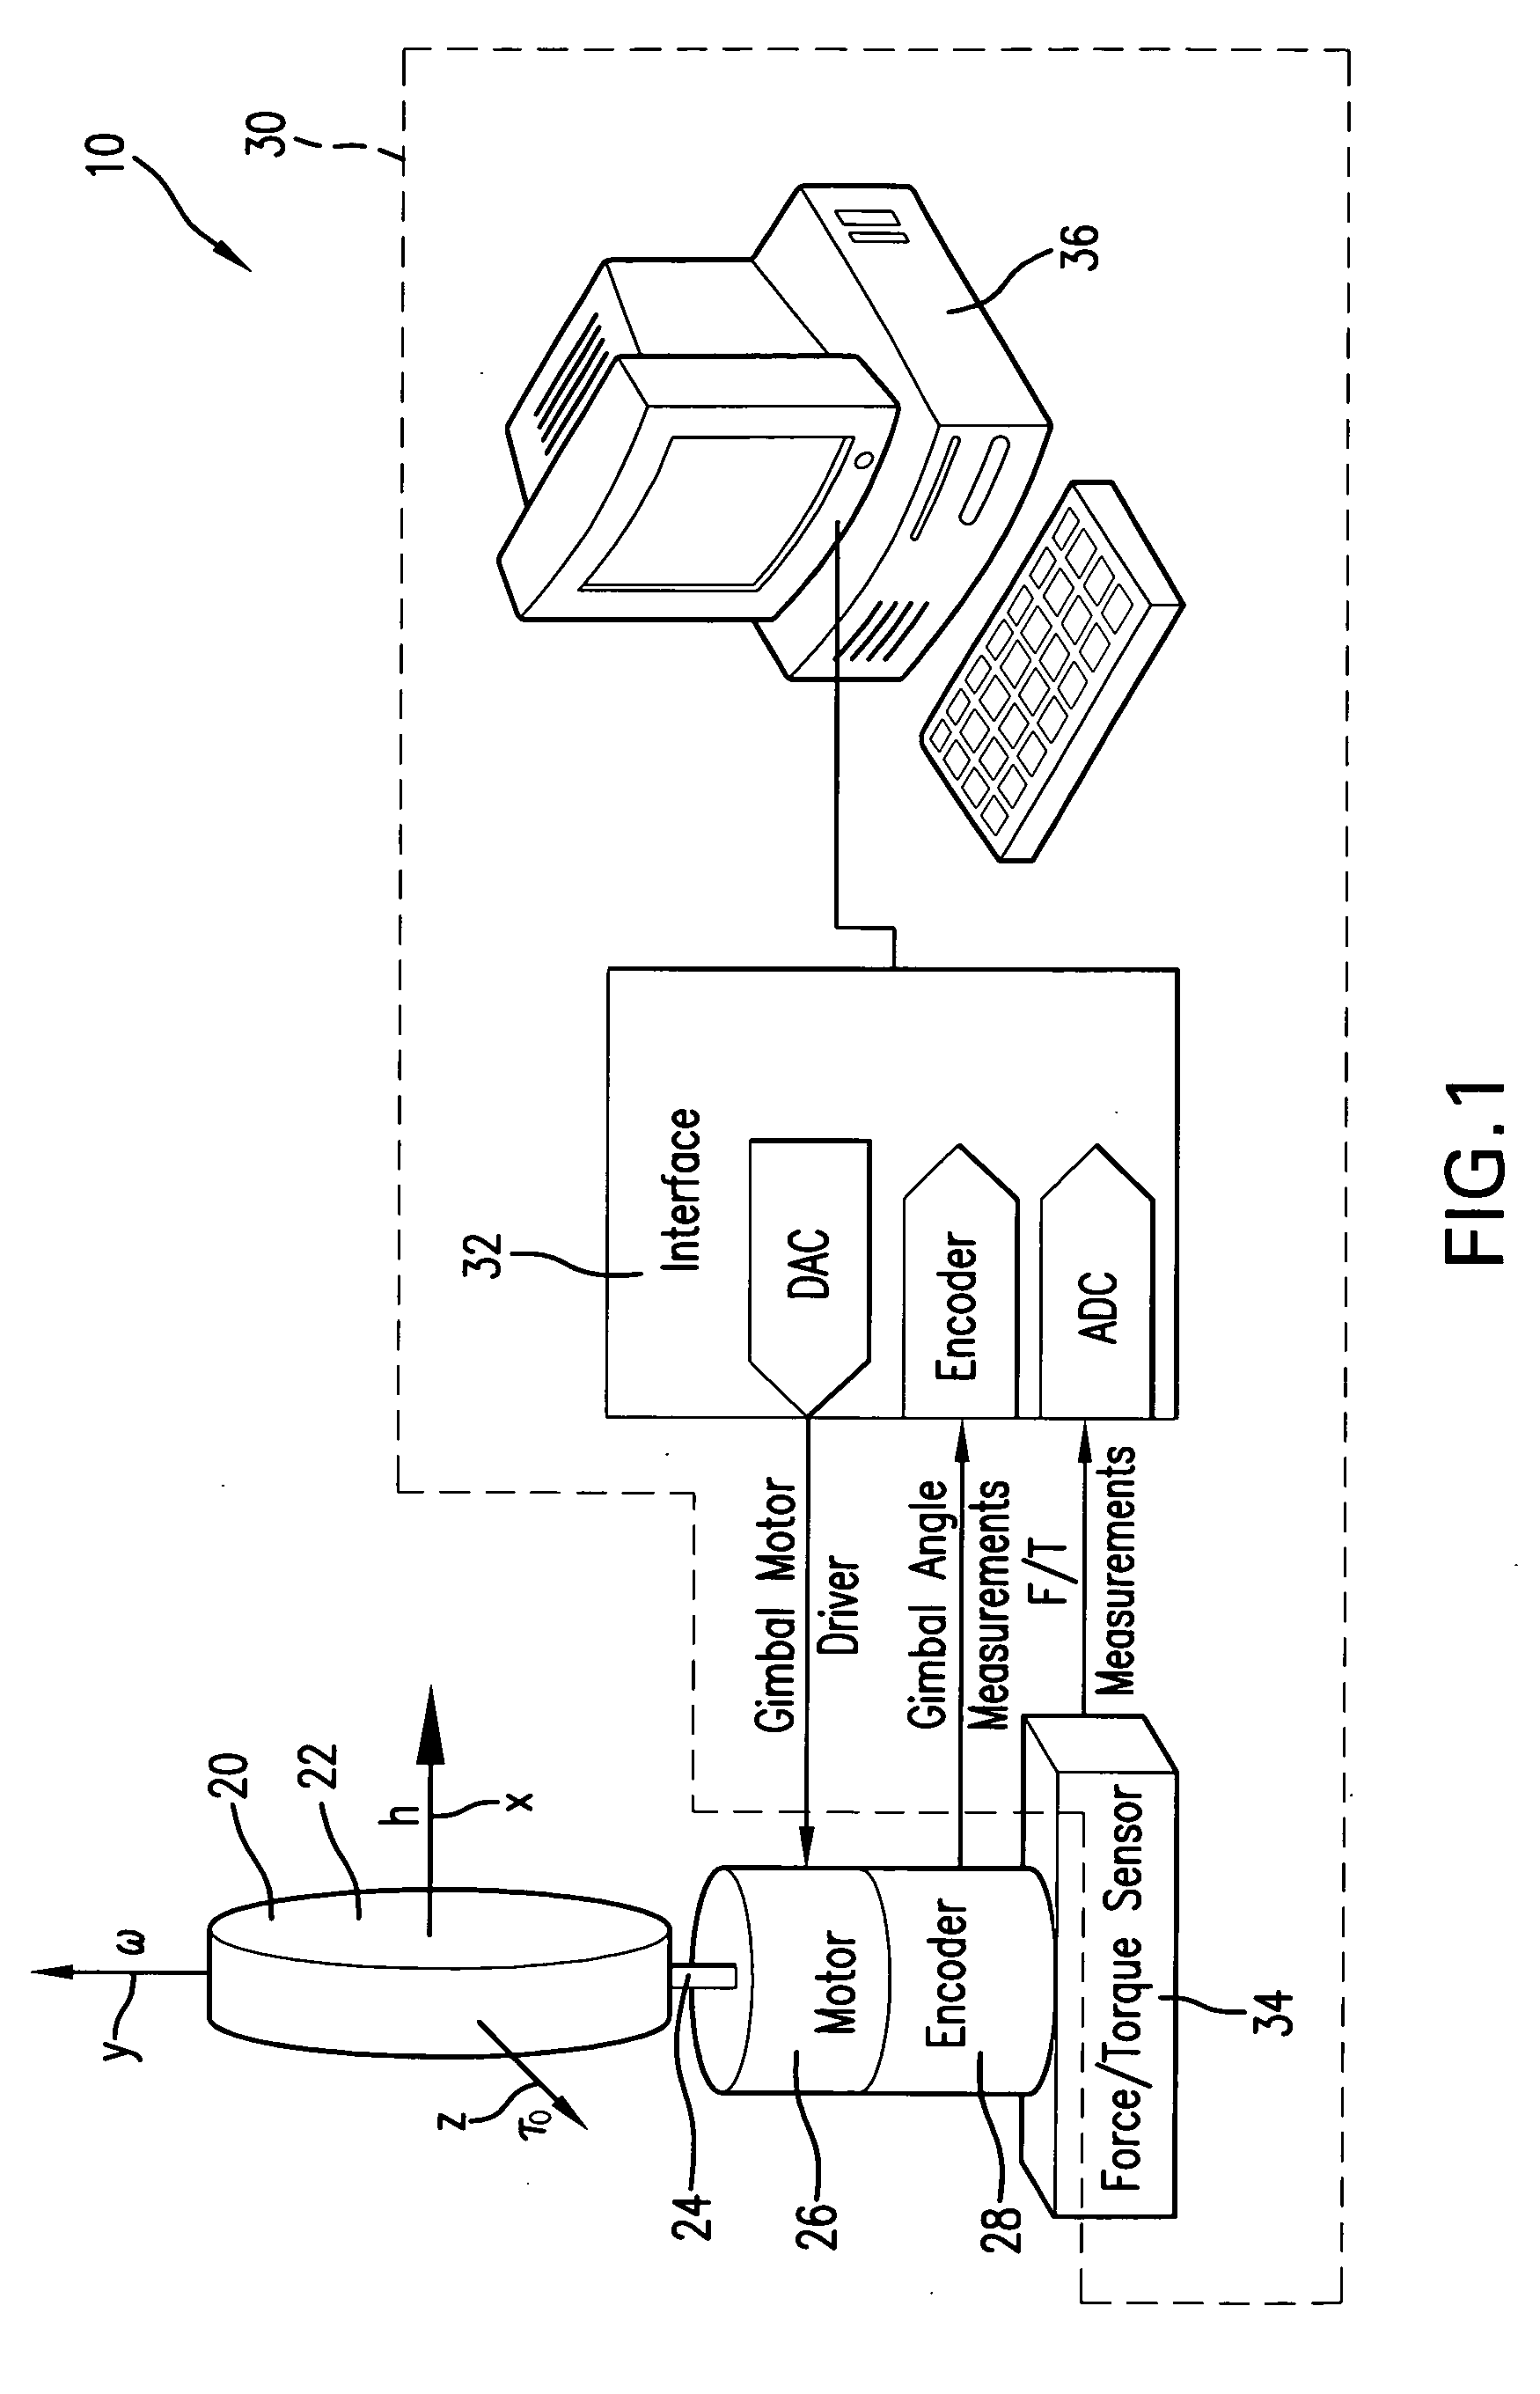 Direct torque actuator control for control moment gyroscope